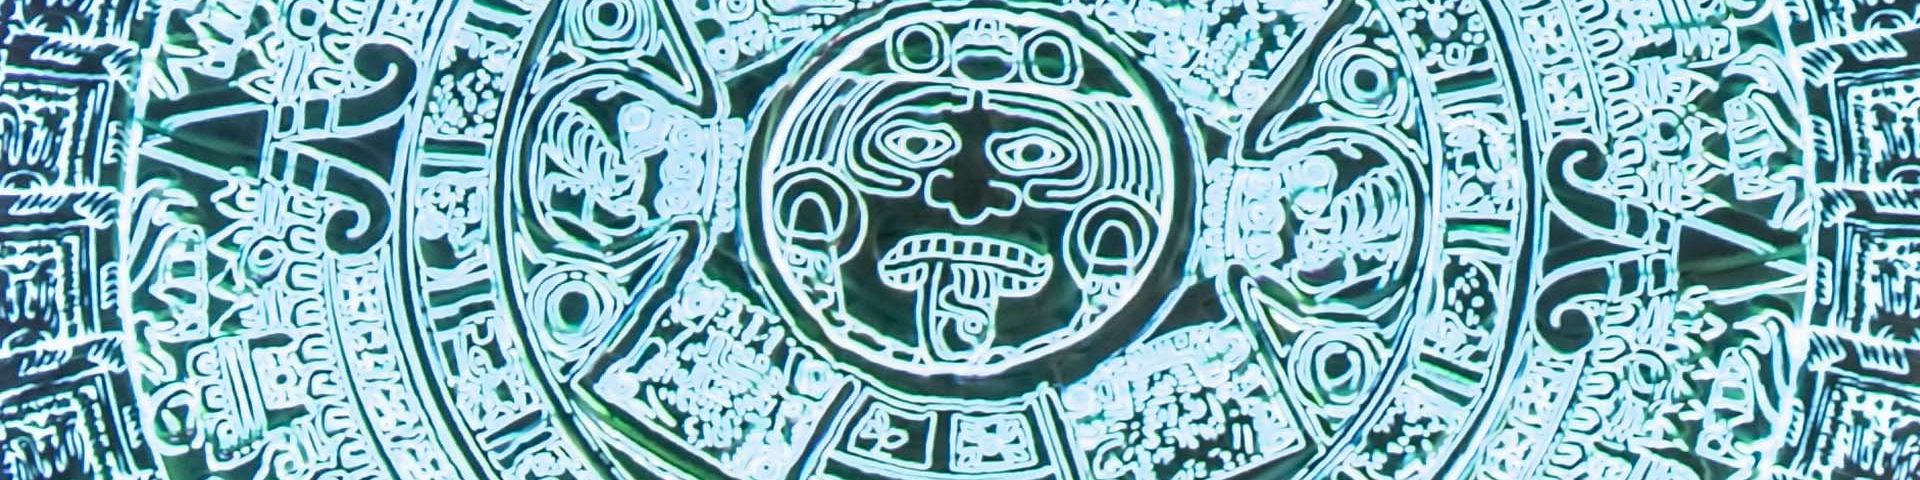 Close-up detail of the projected Aztec Sunstone, showing glyphs in circles around the face of the fifth god.